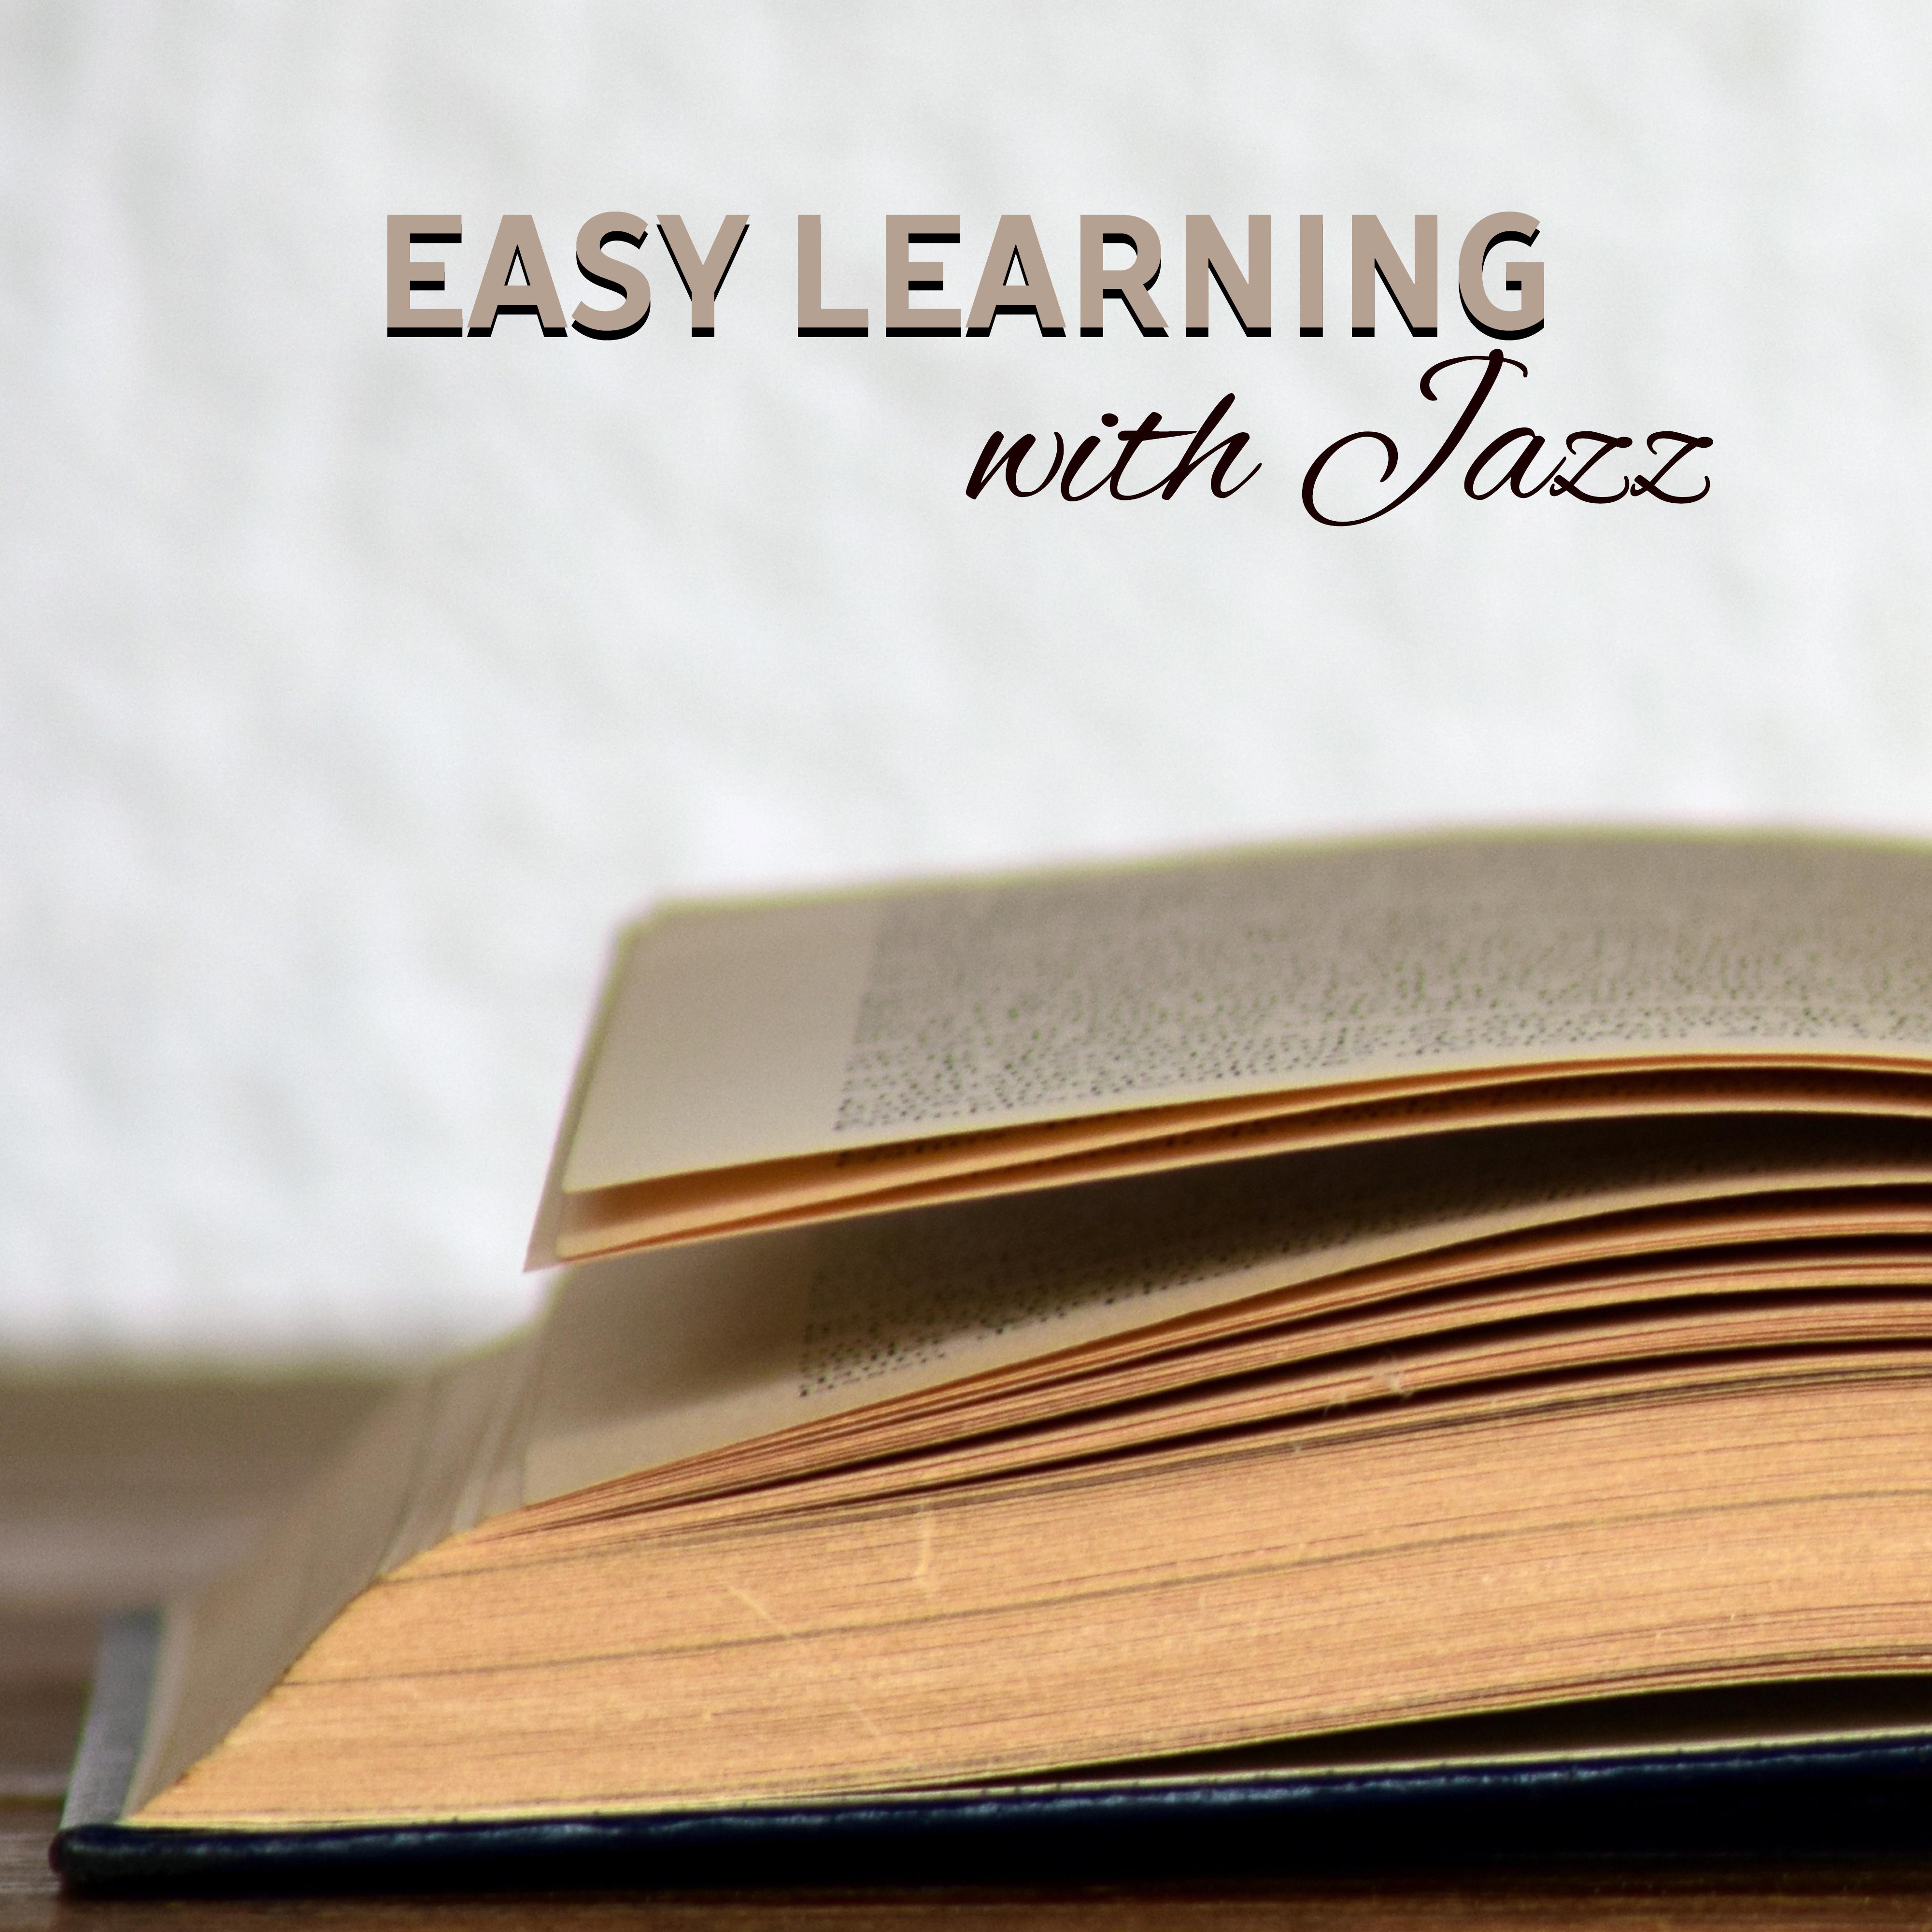 Easy Learning with Jazz  Study Music, Better Concentration, Instrumental Sounds Help Pass Exam, Stress Relief, Brain Power